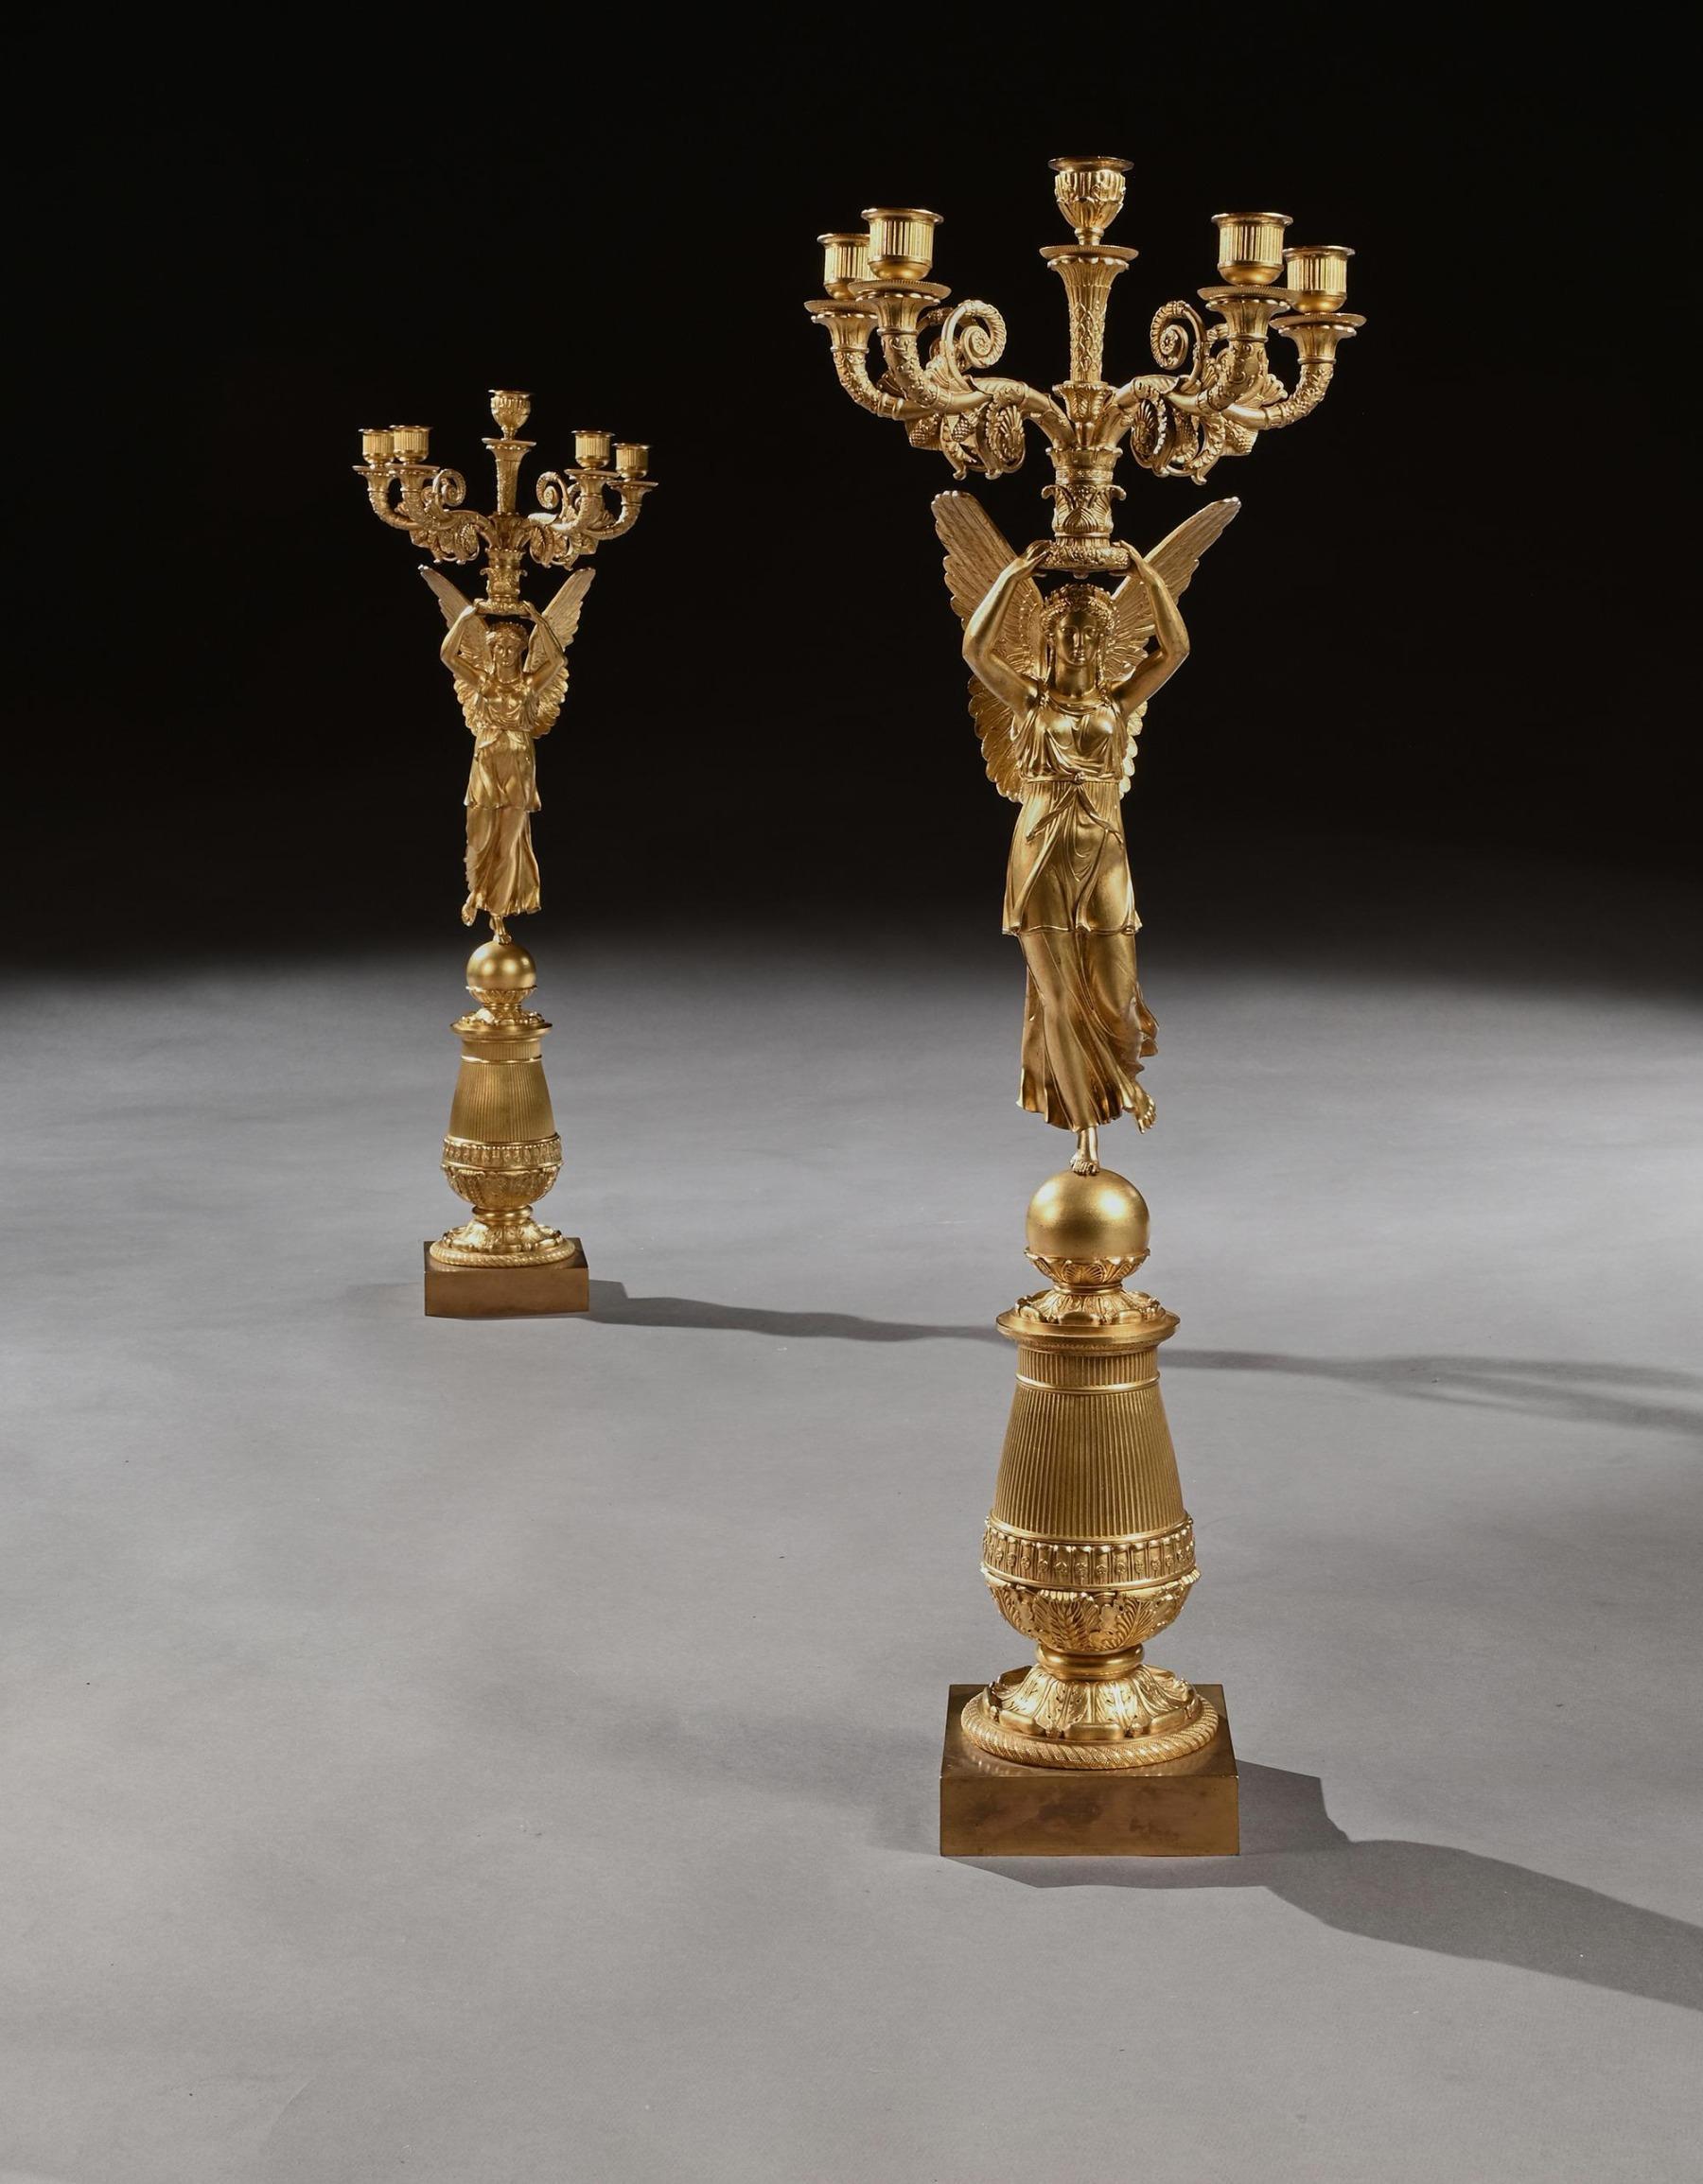 A pair of exceptionally elegant and important late Empire five-light figural candelabra ‘A la Victoire’ in gilt-bronze, attributed to Pierre-Philippe Thomire, after a design by Charles Percier. Imposing size at 81cm in height.

Paris